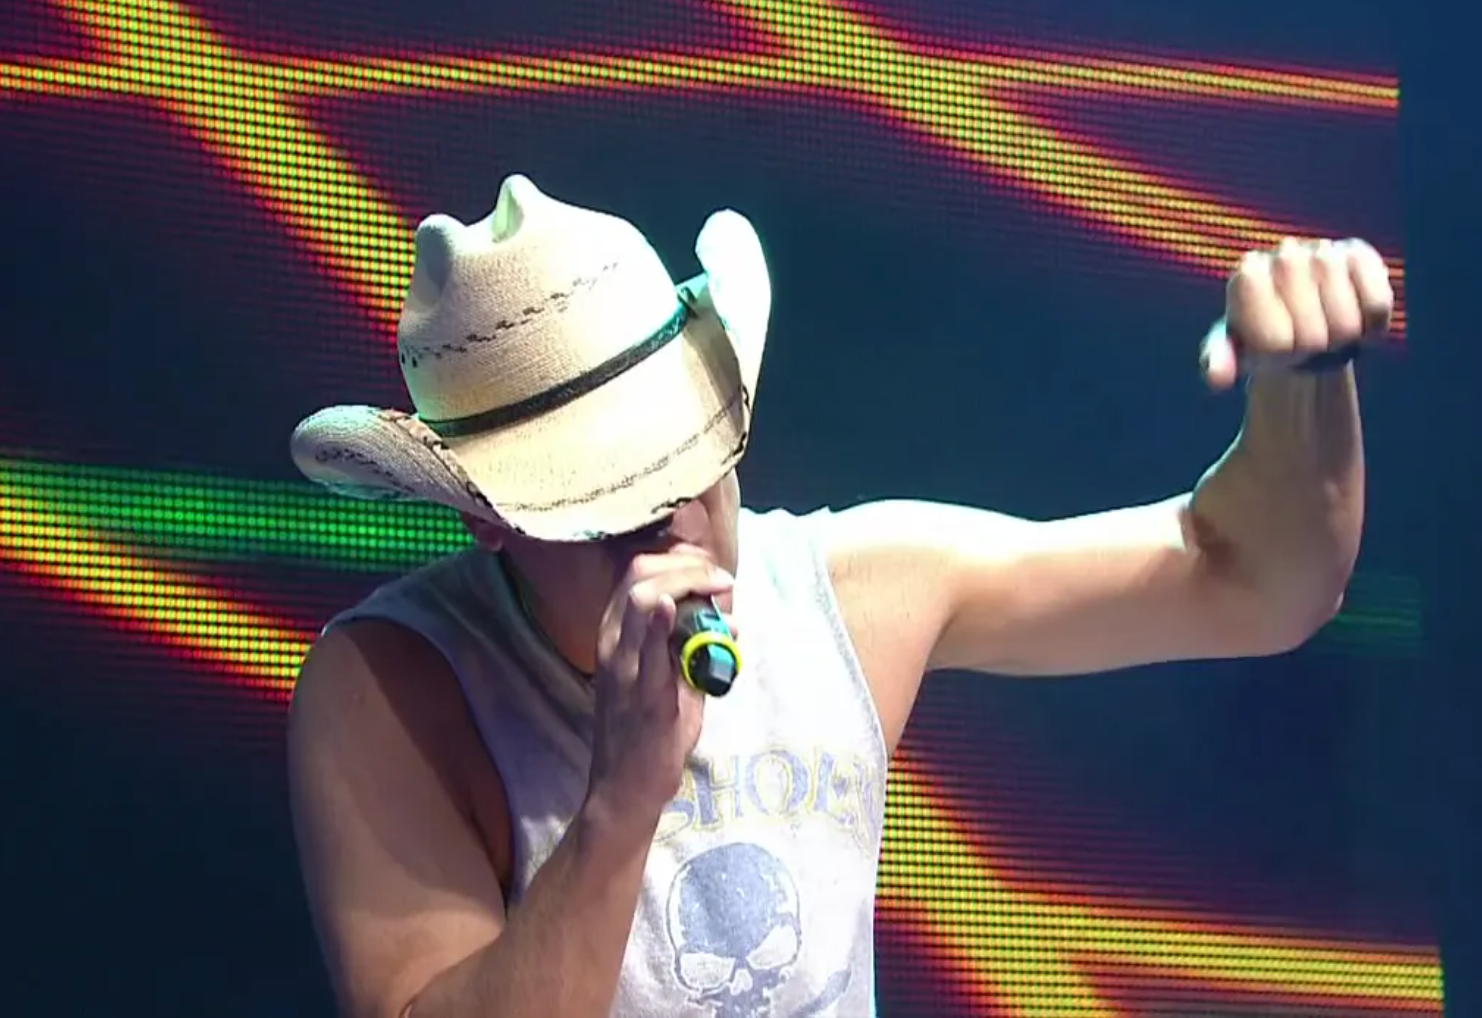 Summer concert series returns to Delray Beach Friday night with Kenny Chesney tribute band